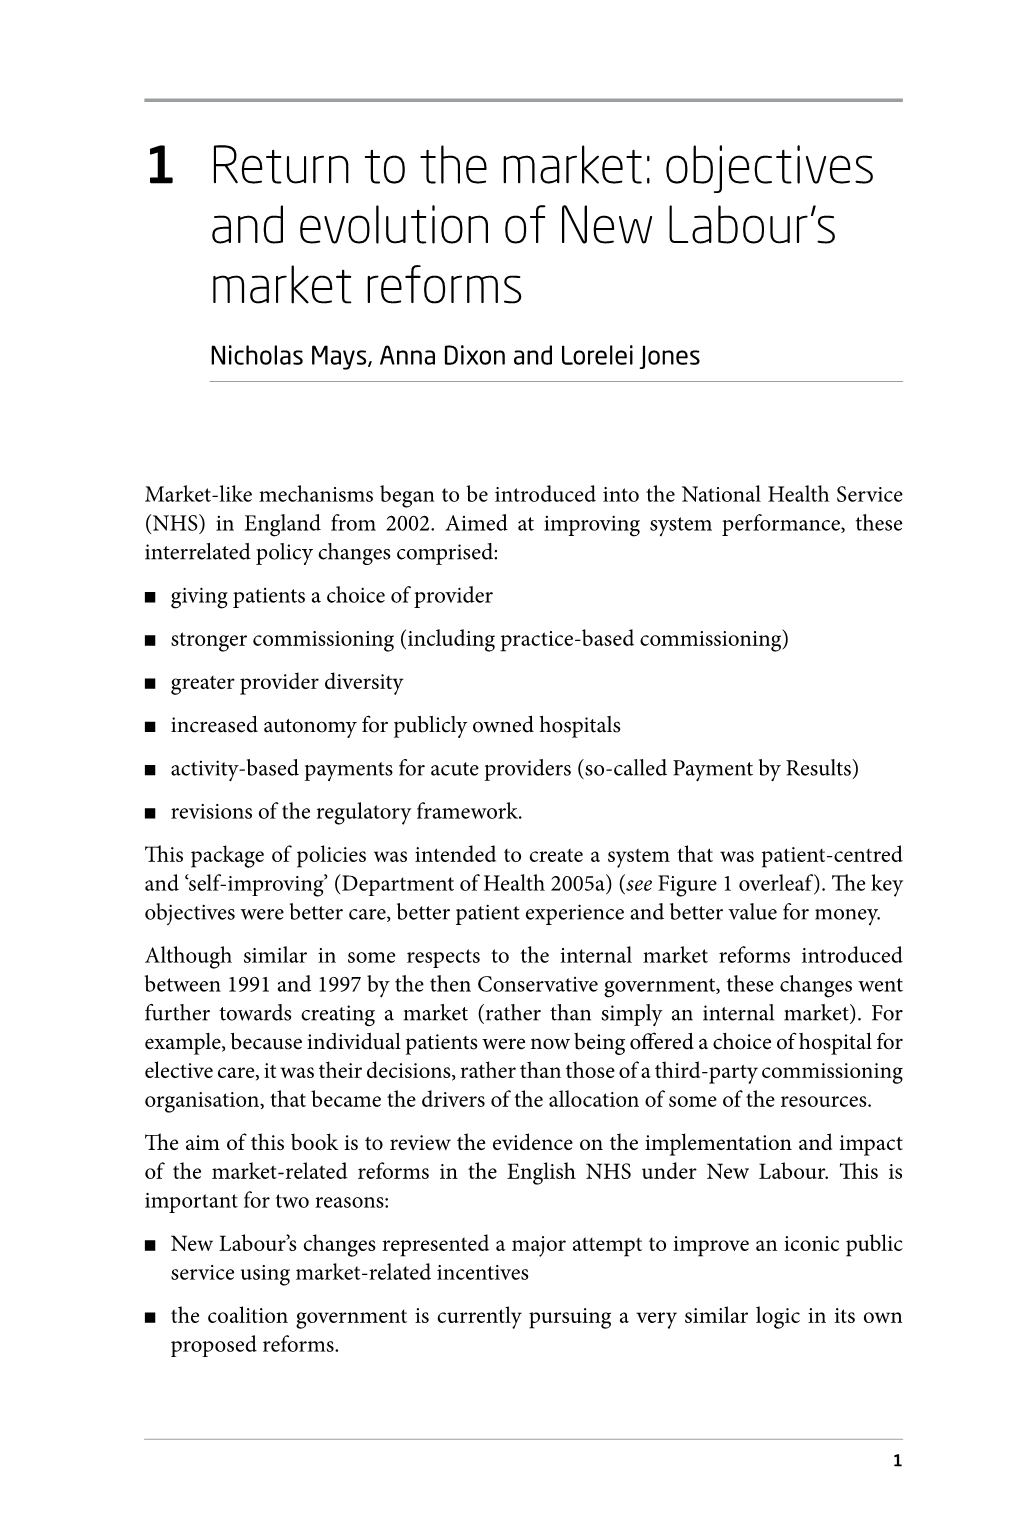 Chapter 1: Return to the Market: Objectives and Evolution of New Labour's Market Reforms